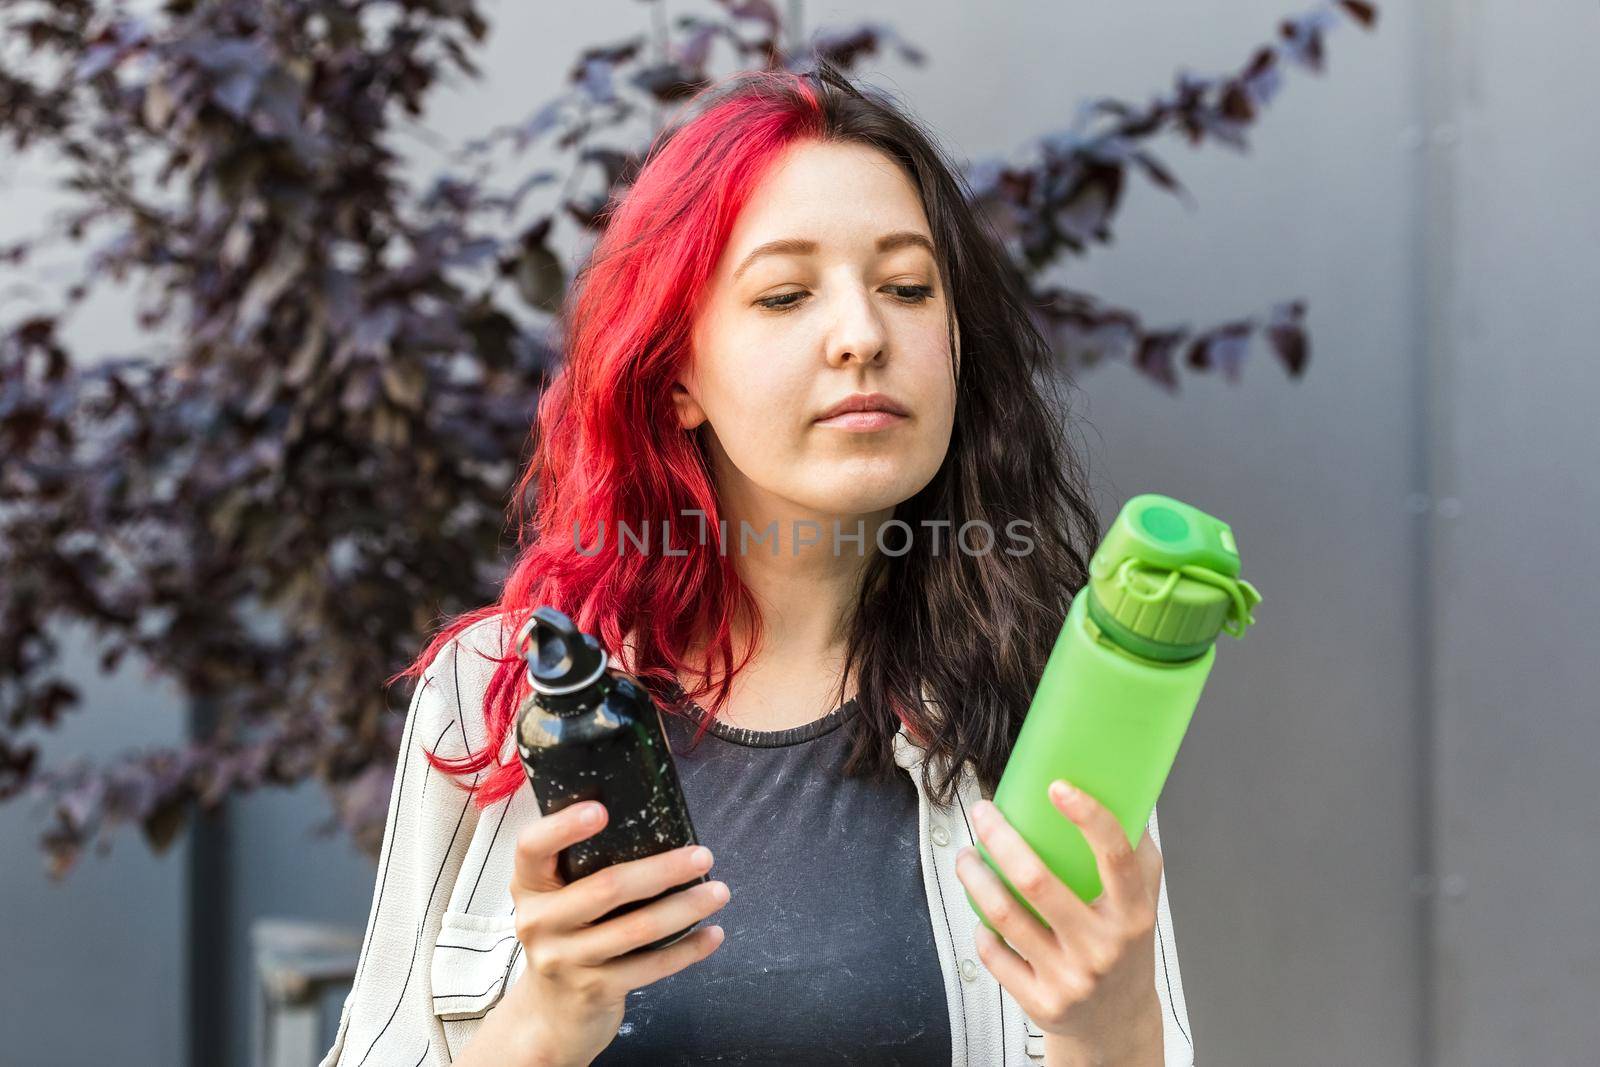 Woman choosing between two types of water bottles by Syvanych